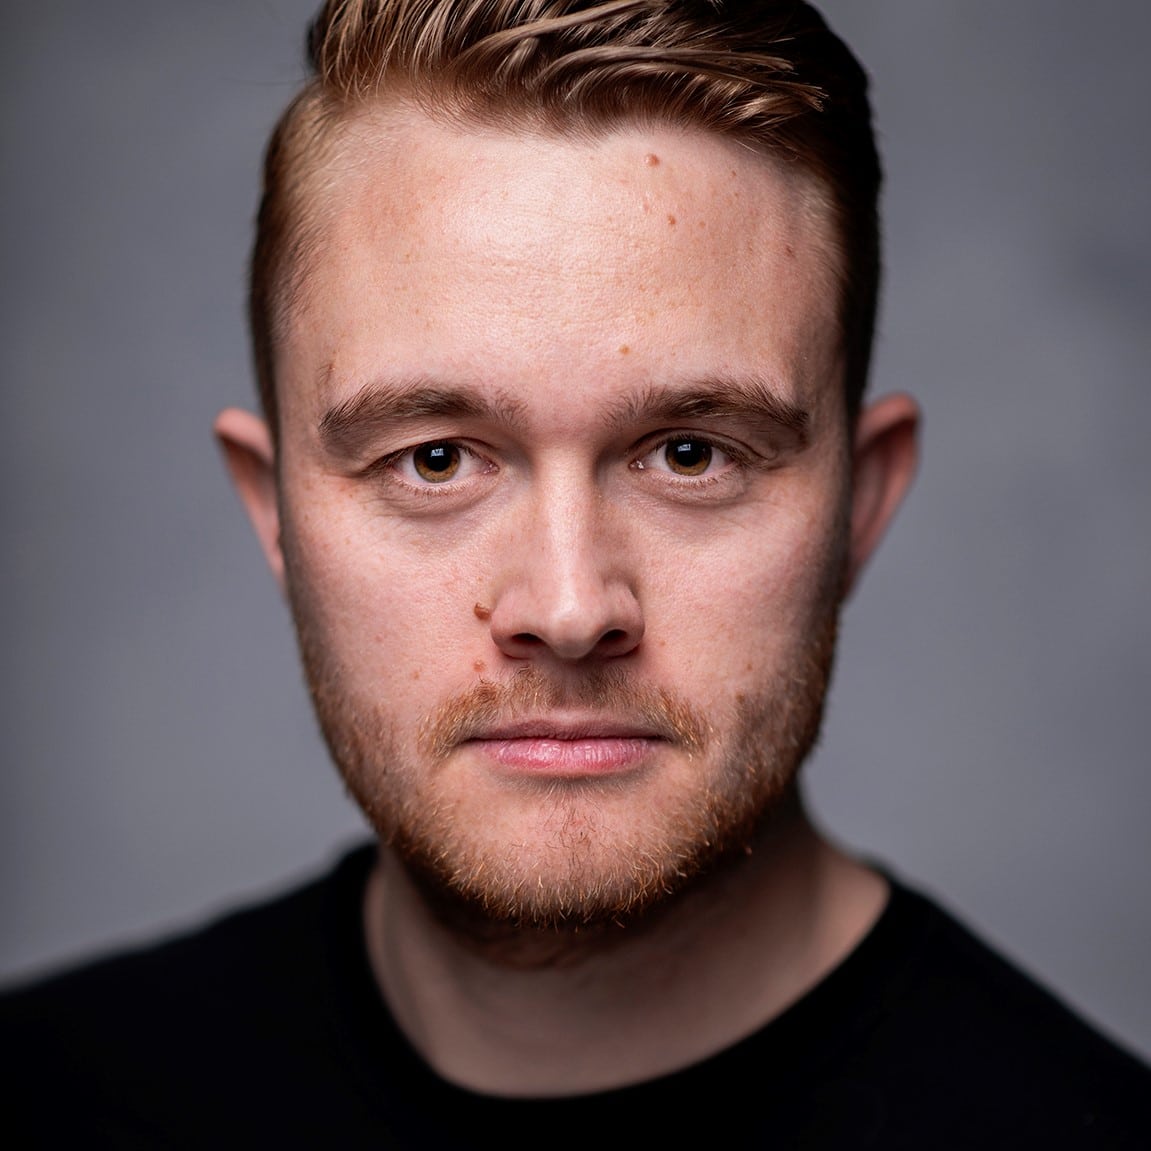 hire-british-voiceover-rory-great-british-voices